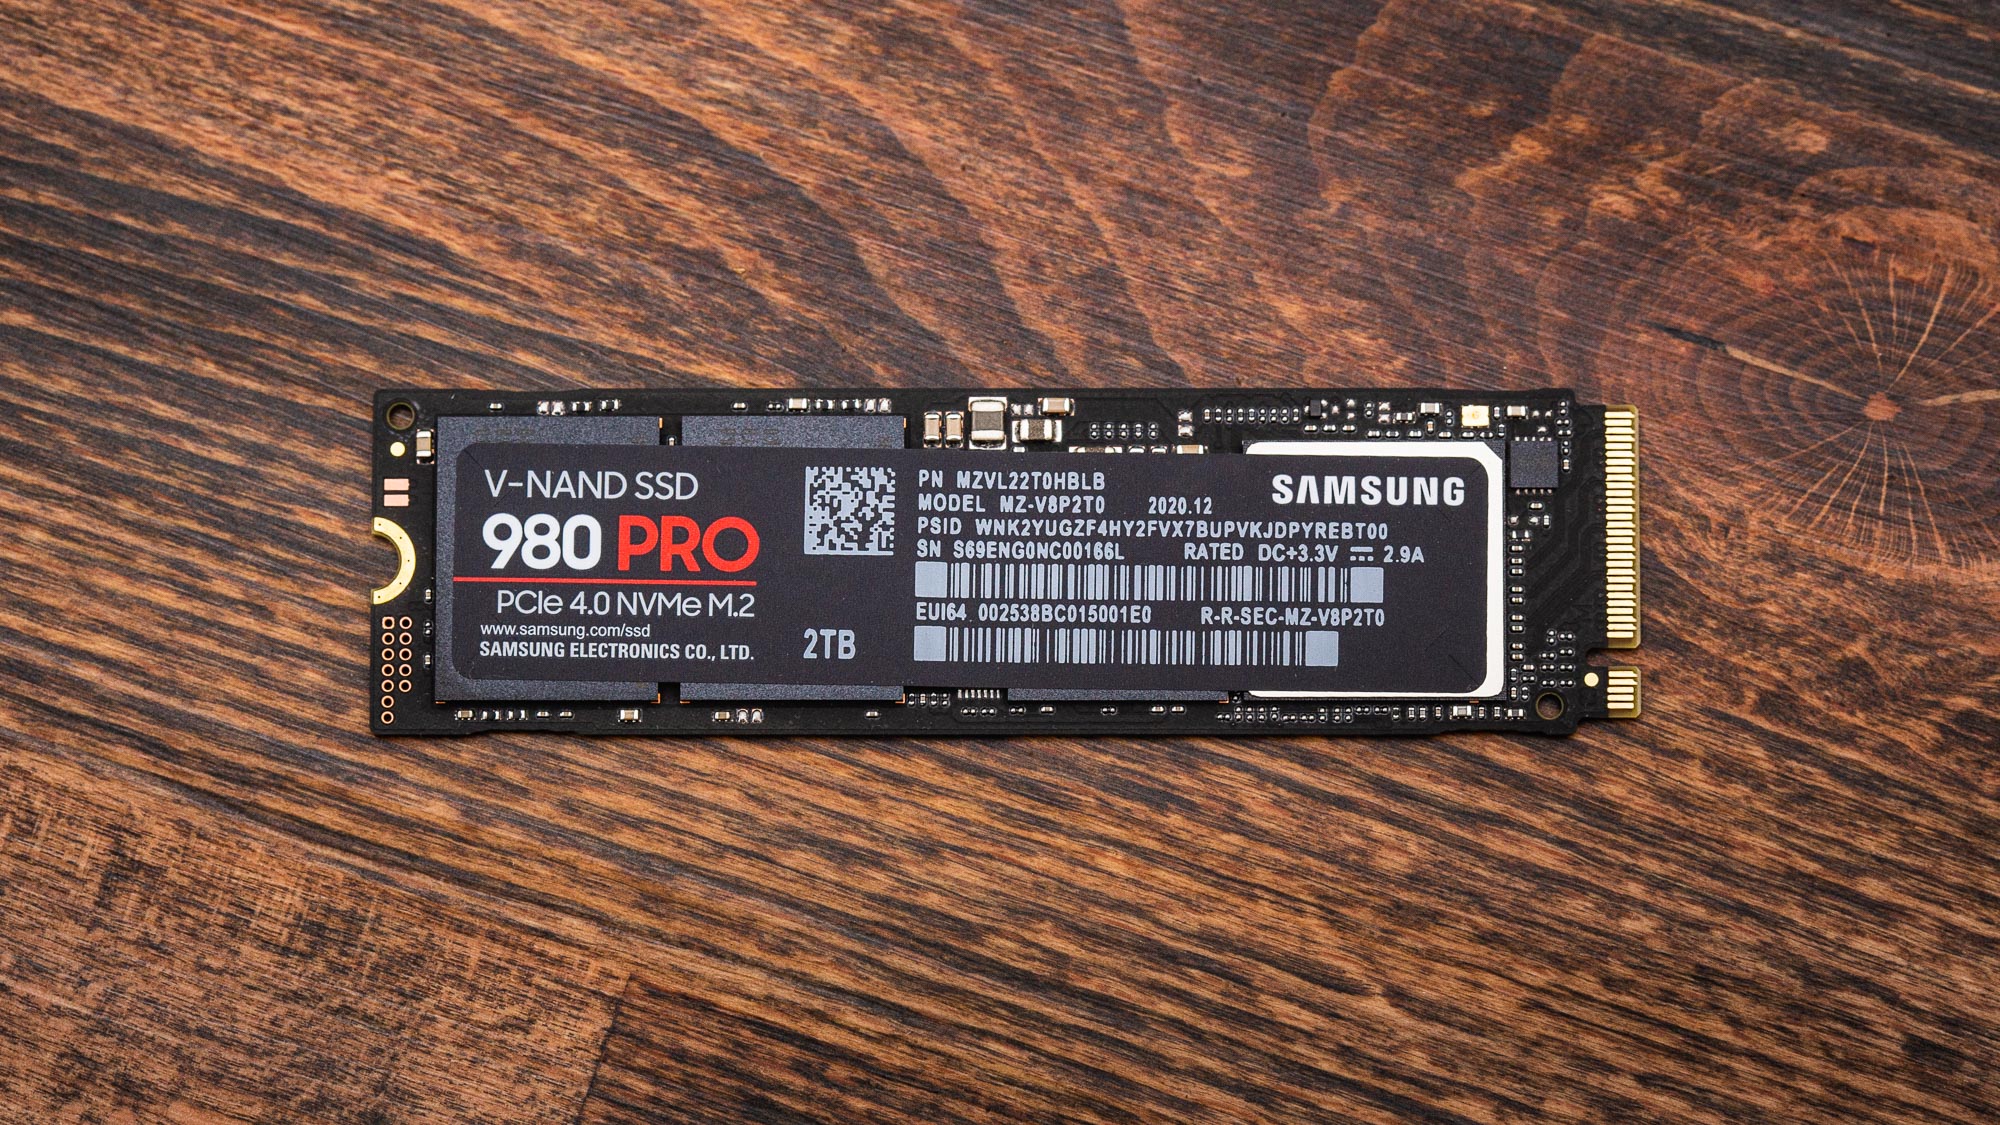 samsung-980-pro-m.2-nvme-ssd-review:-redefining-gen4-performance-(updated)